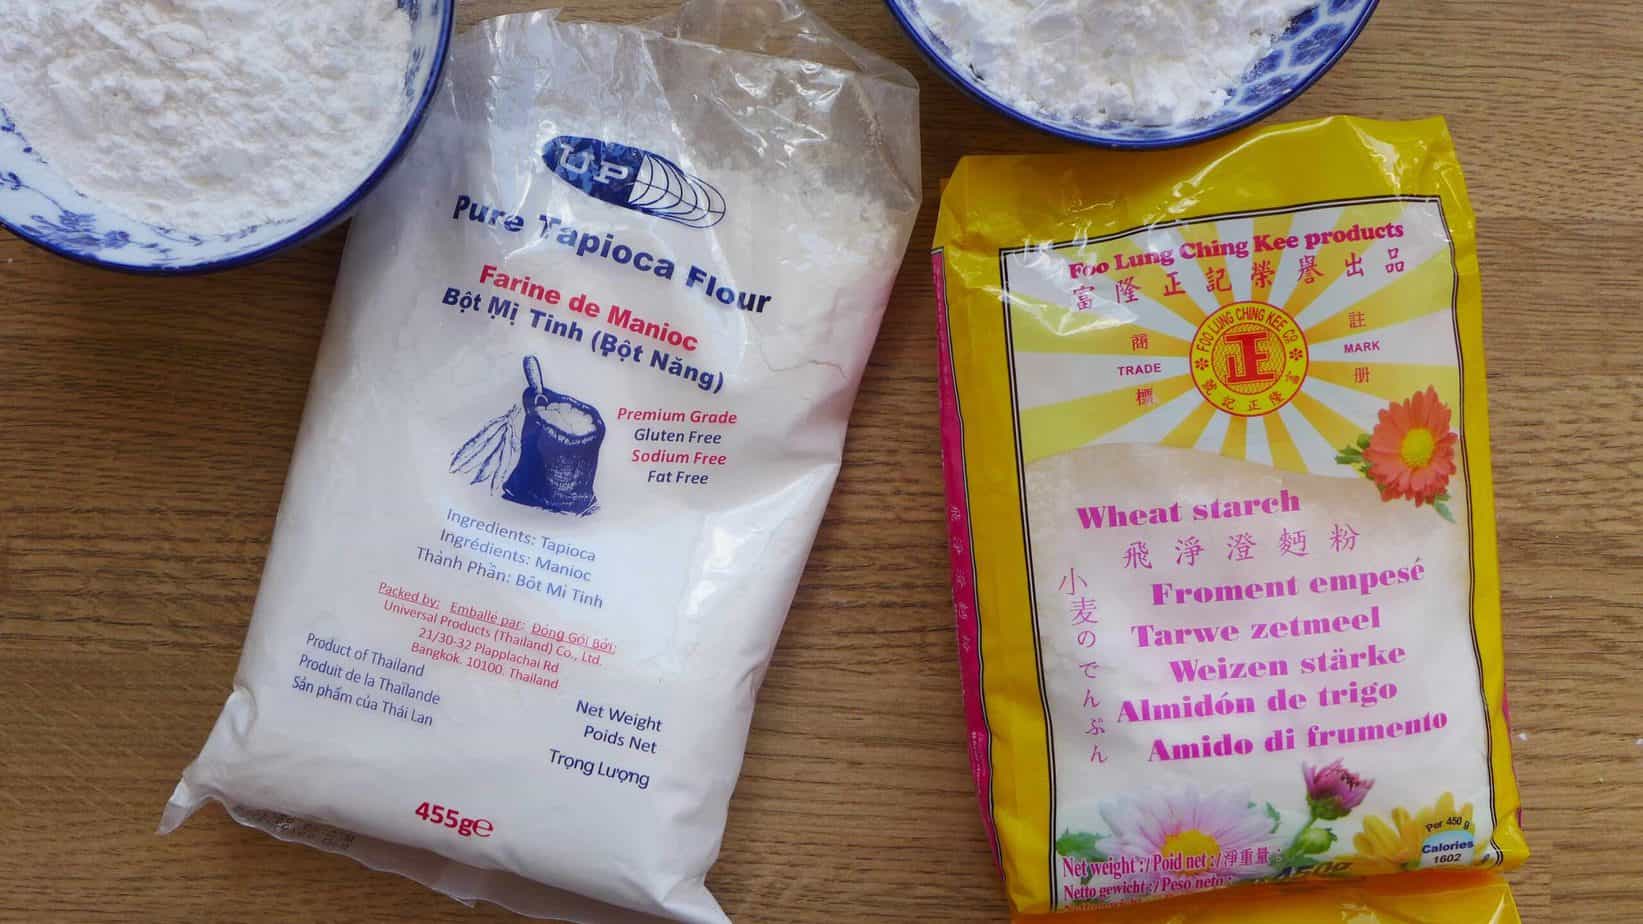 A bag of tapioca starch & a bag of wheat starch